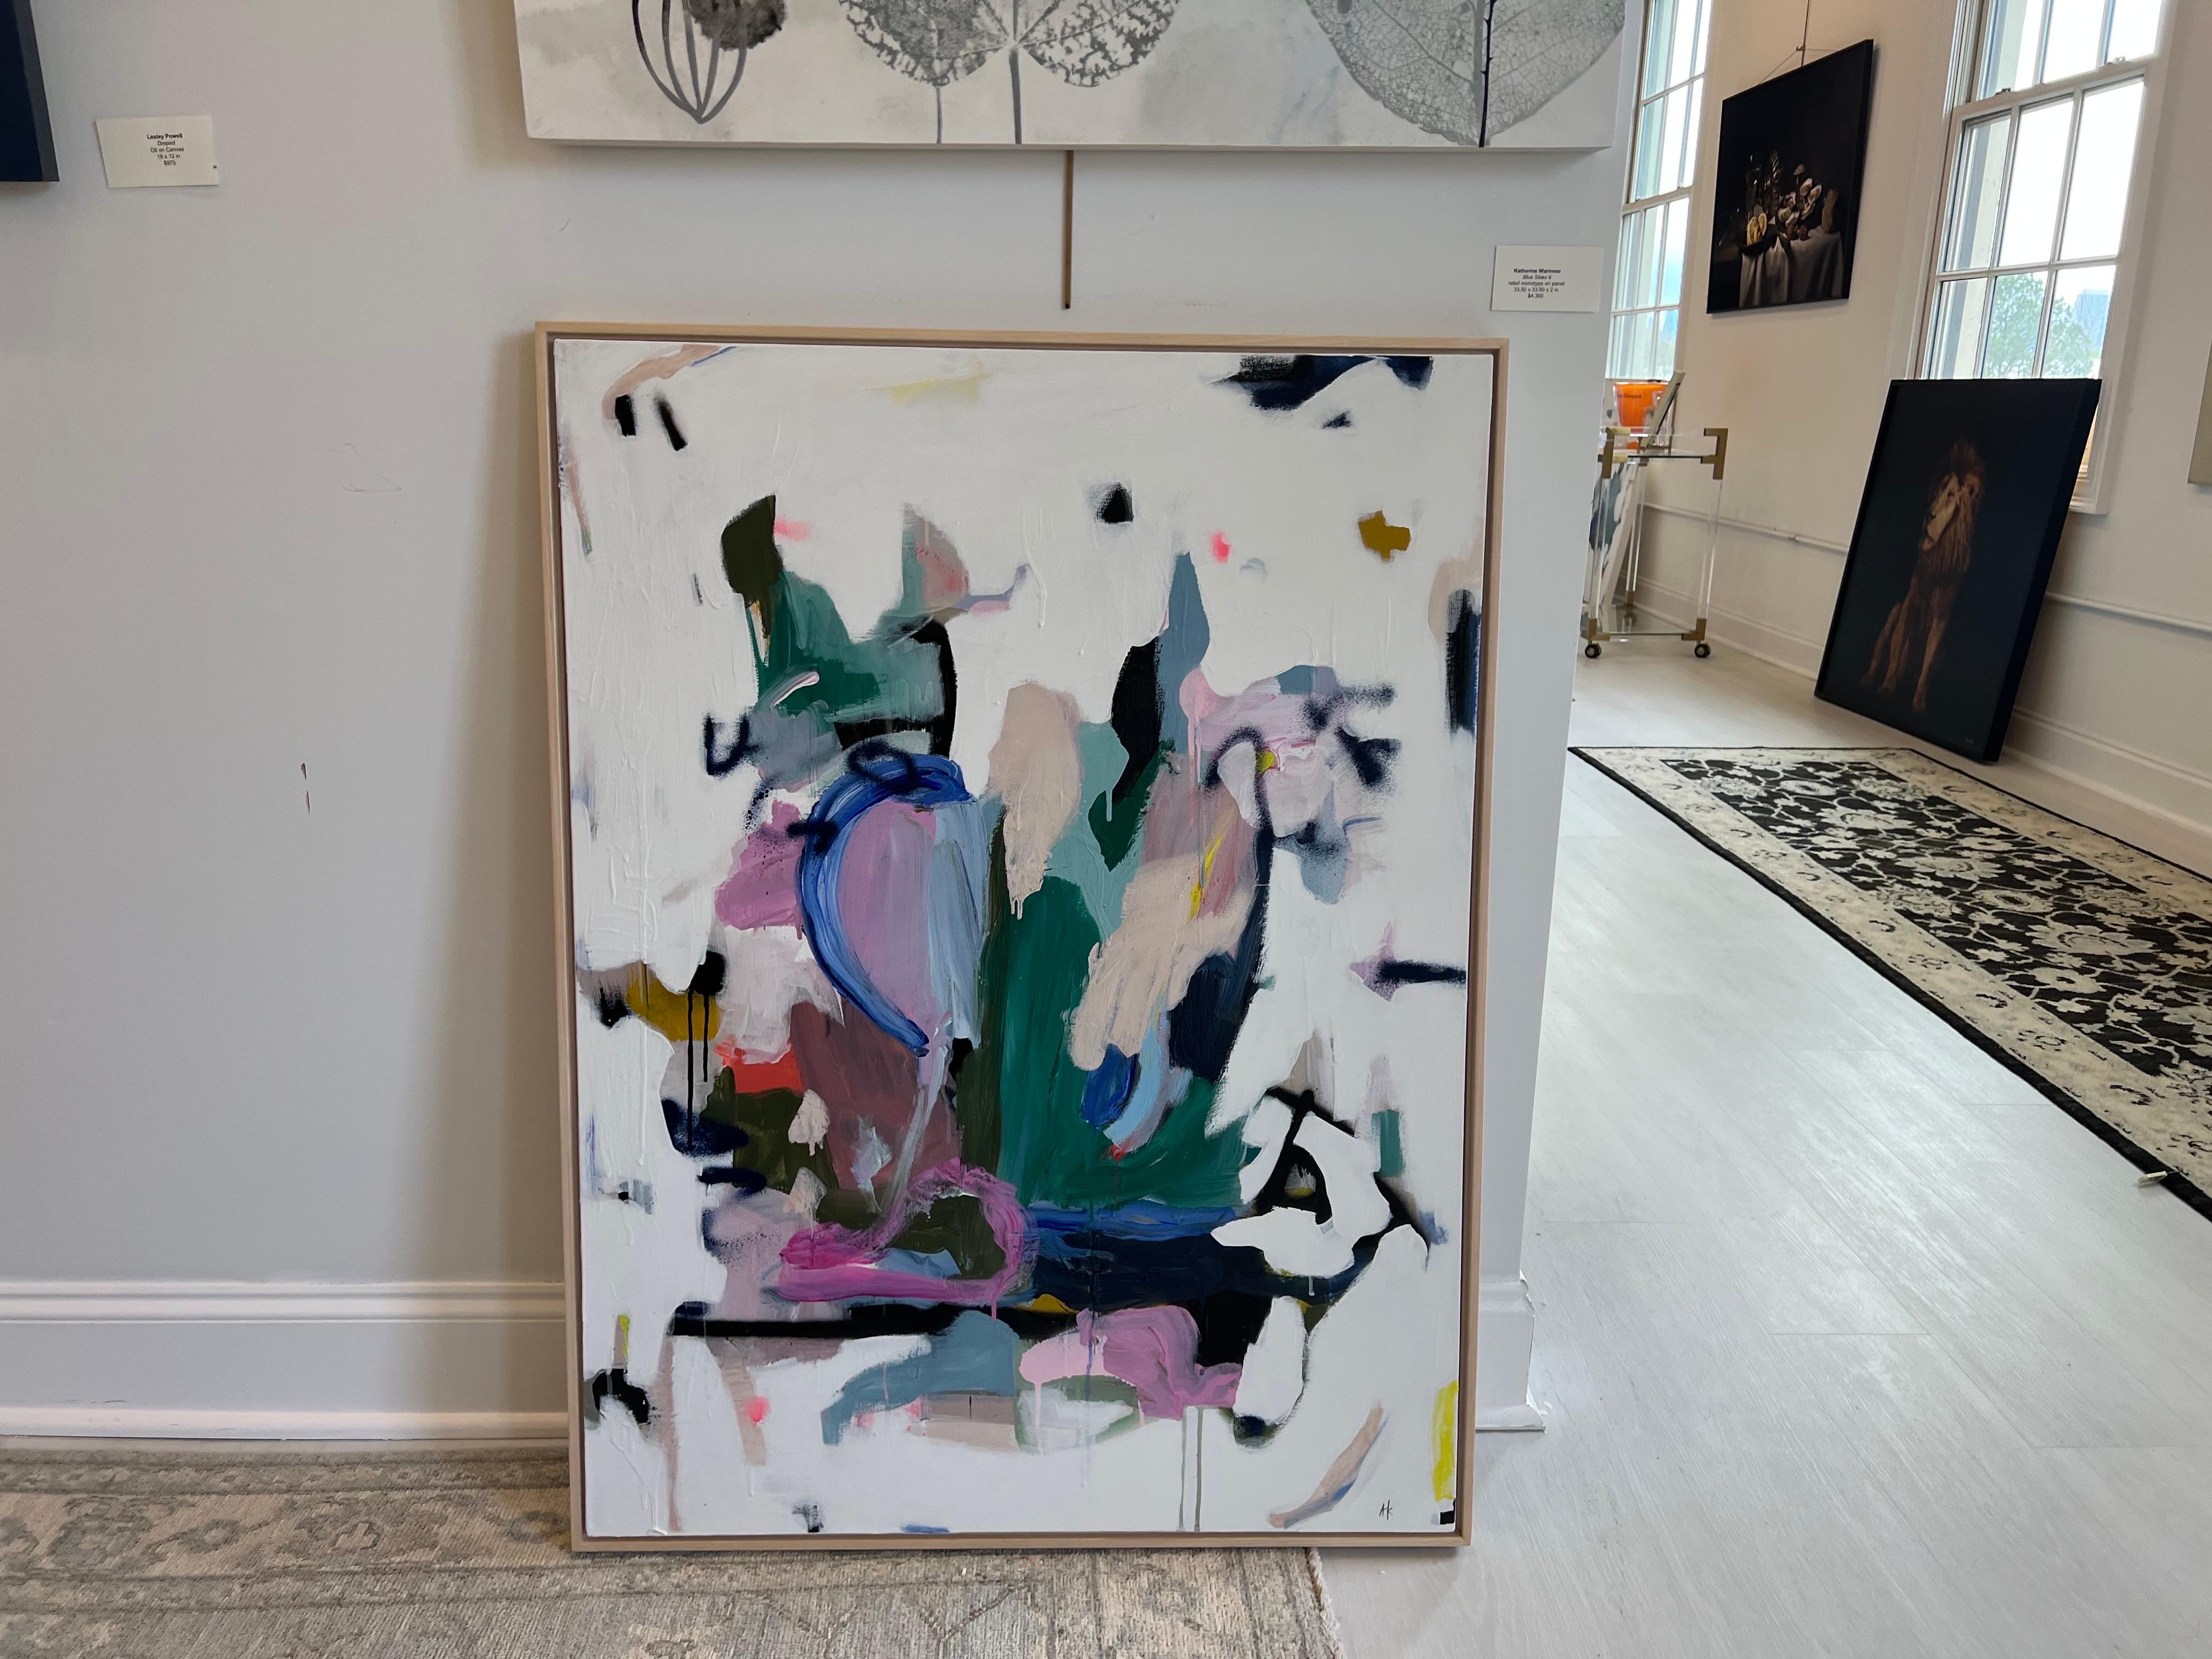 'Then Came Another' is a mixed media on canvas framed abstract painting of vertical format created by American artist Annie King in 2022. Featuring a palette made of green, black, pink, white and blue among other tones, this painting showcases